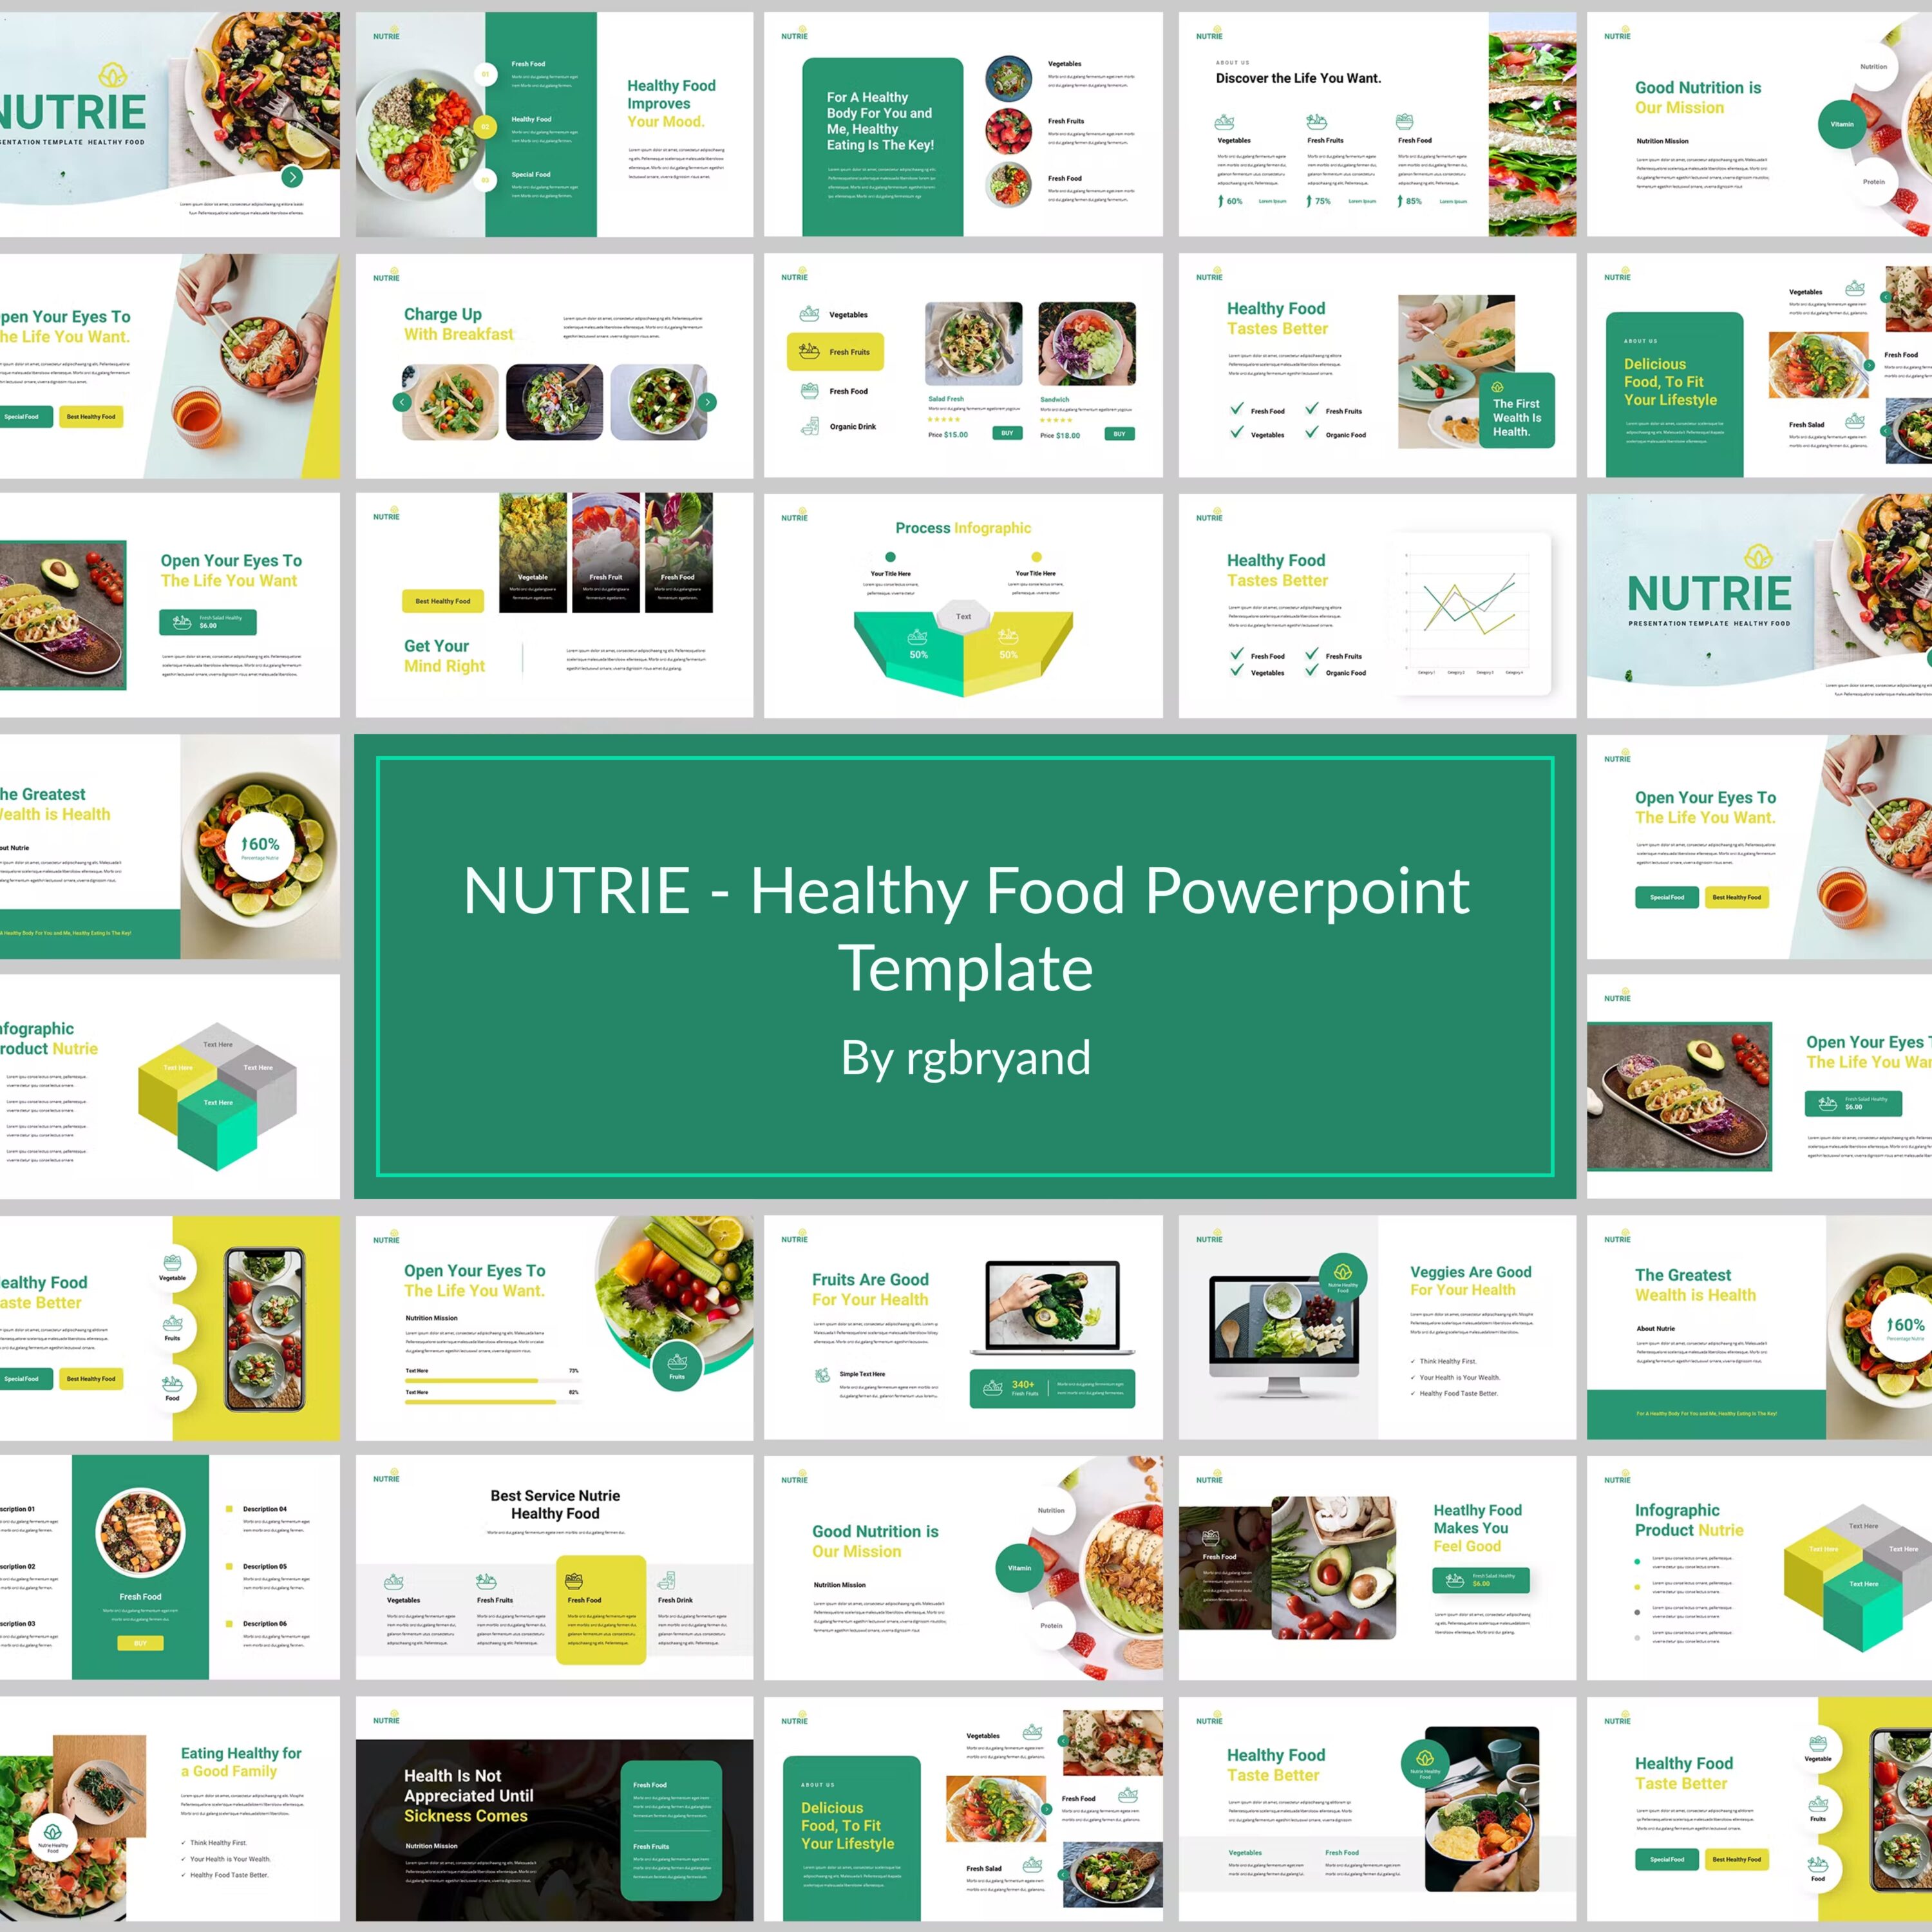 NUTRIE Healthy Food Powerpoint Template - main image preview.